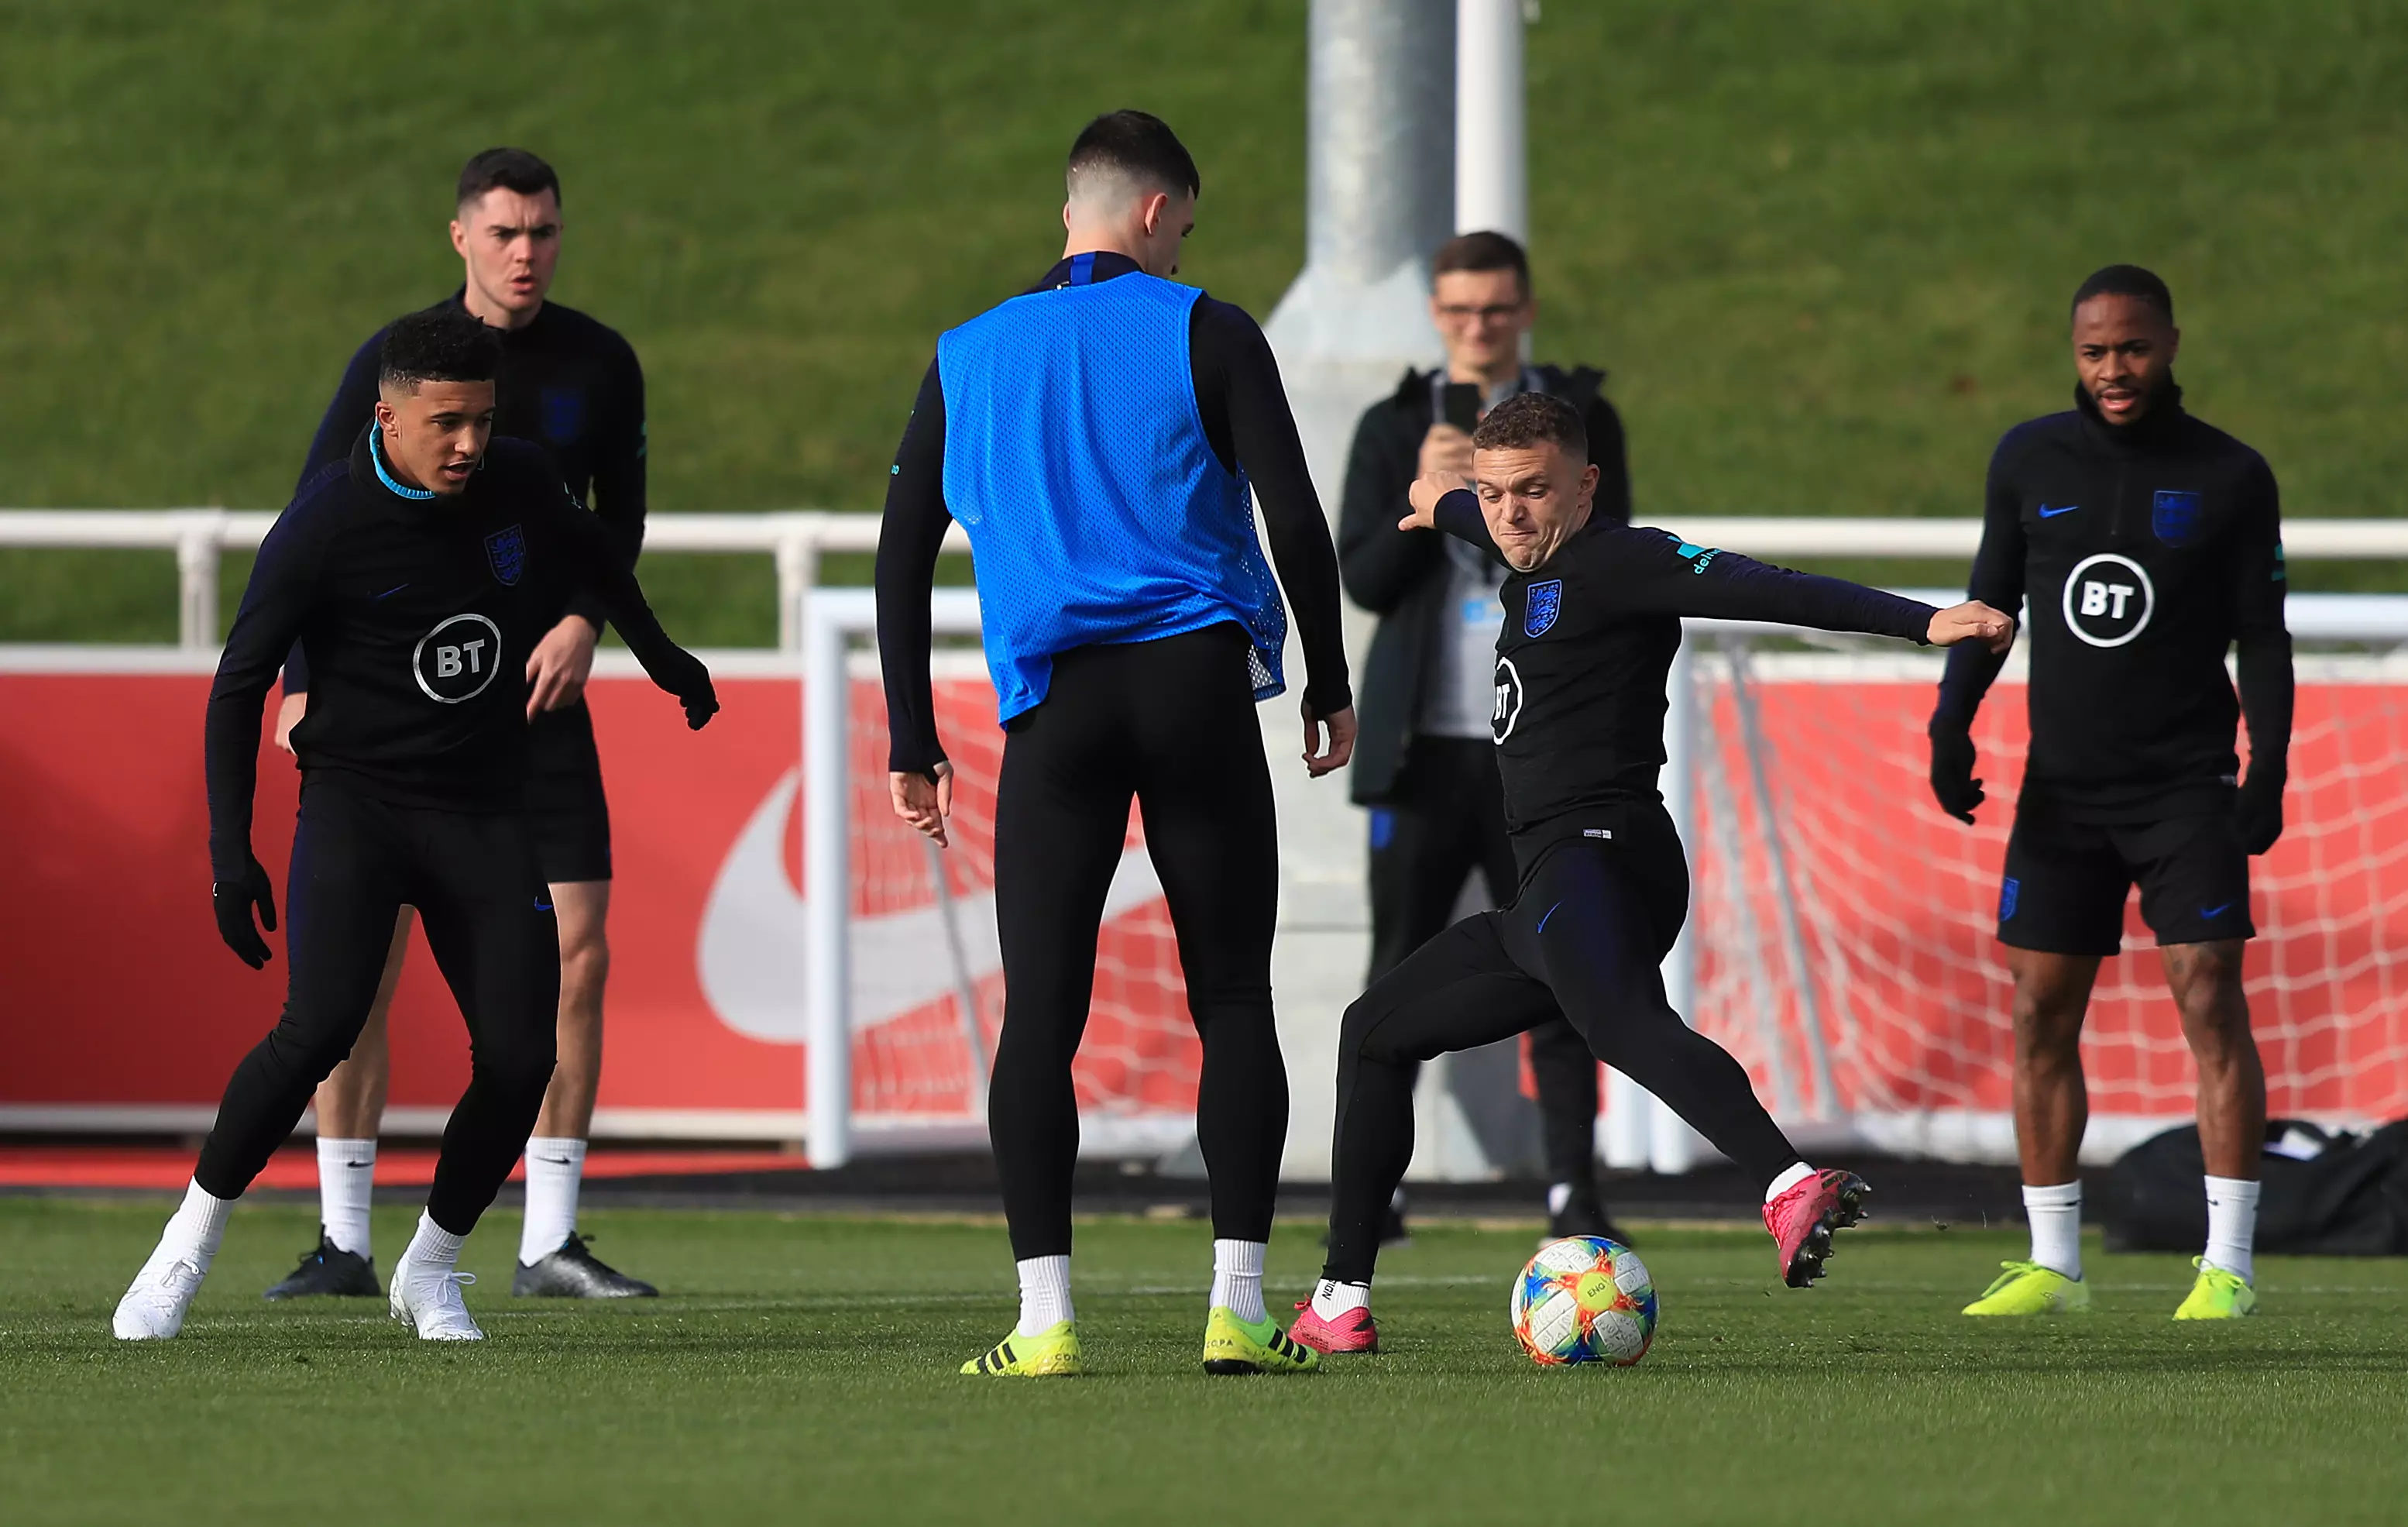 Czech Republic vs England: LIVE Stream and TV Channel For Euro 2020 Qualifier